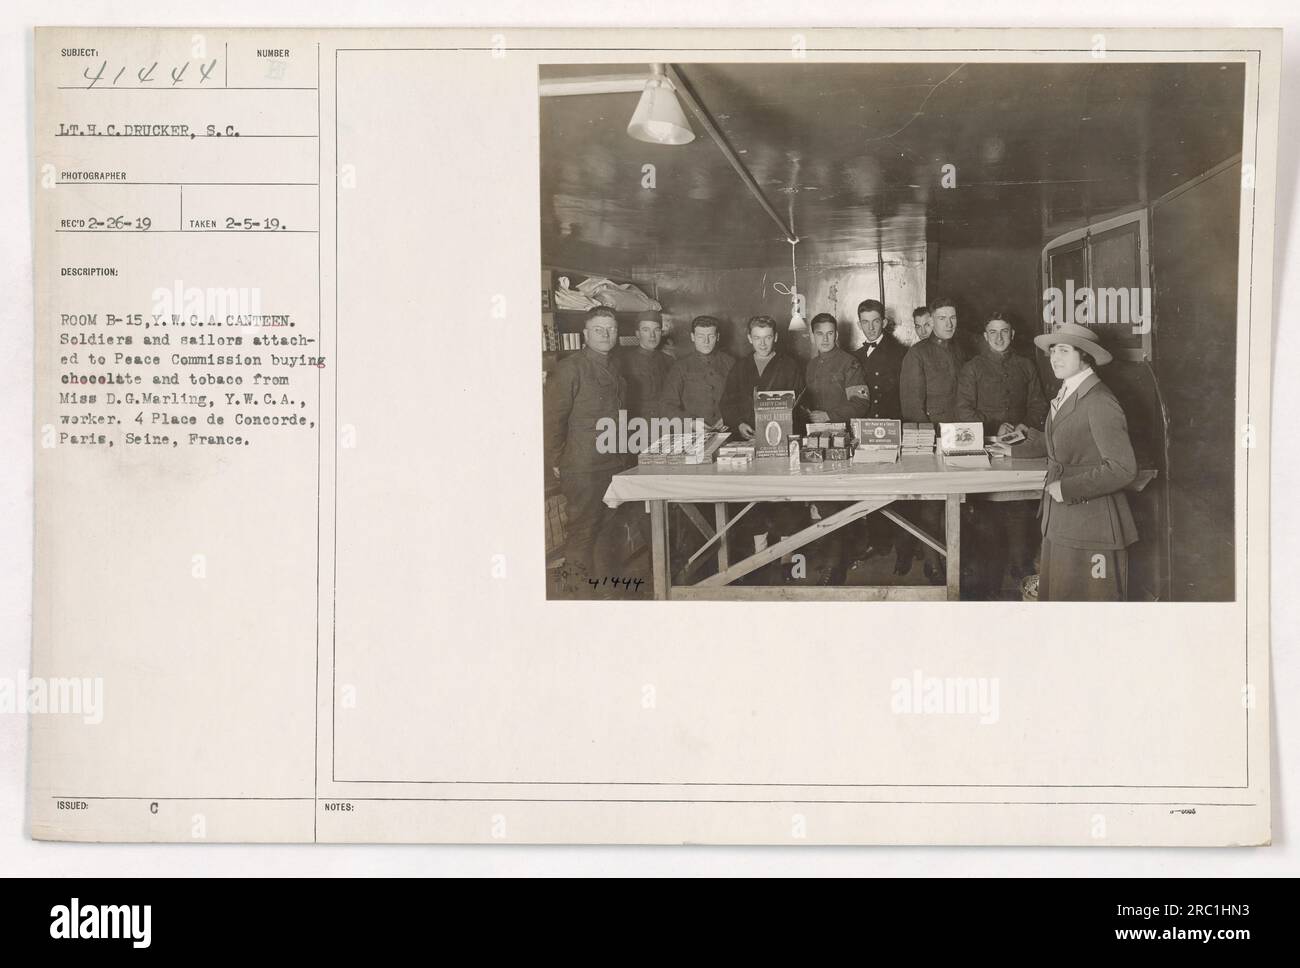 American soldiers and sailors who are part of the Peace Commission purchasing chocolate and tobacco from Miss D. G. Marling, a Y.W.C.A. worker, at the Y.W.C.A. Canteen located at 4 Place de Concorde, Paris, France. This photograph was taken on February 5, 1919, by photographer Lt. H.C. Drucker, S.C. It is cataloged with the number 111-SC-41444 and is a part of the collection from the Photographs of American Military Activities during World War One. Stock Photo